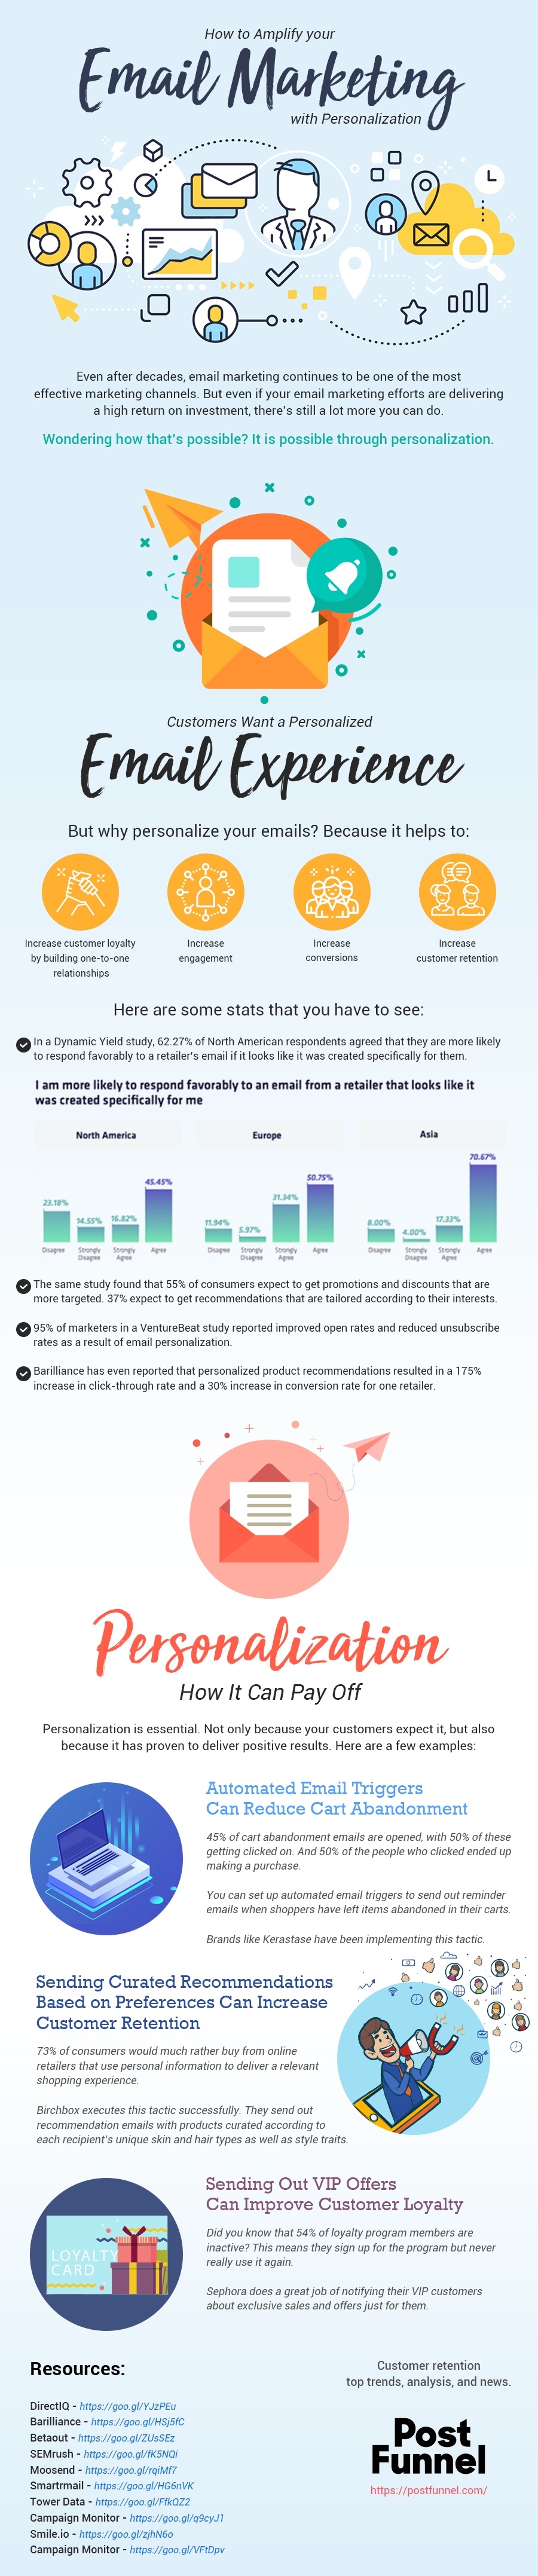 How to Improve Your Email Marketing With Personalization [Infographic]